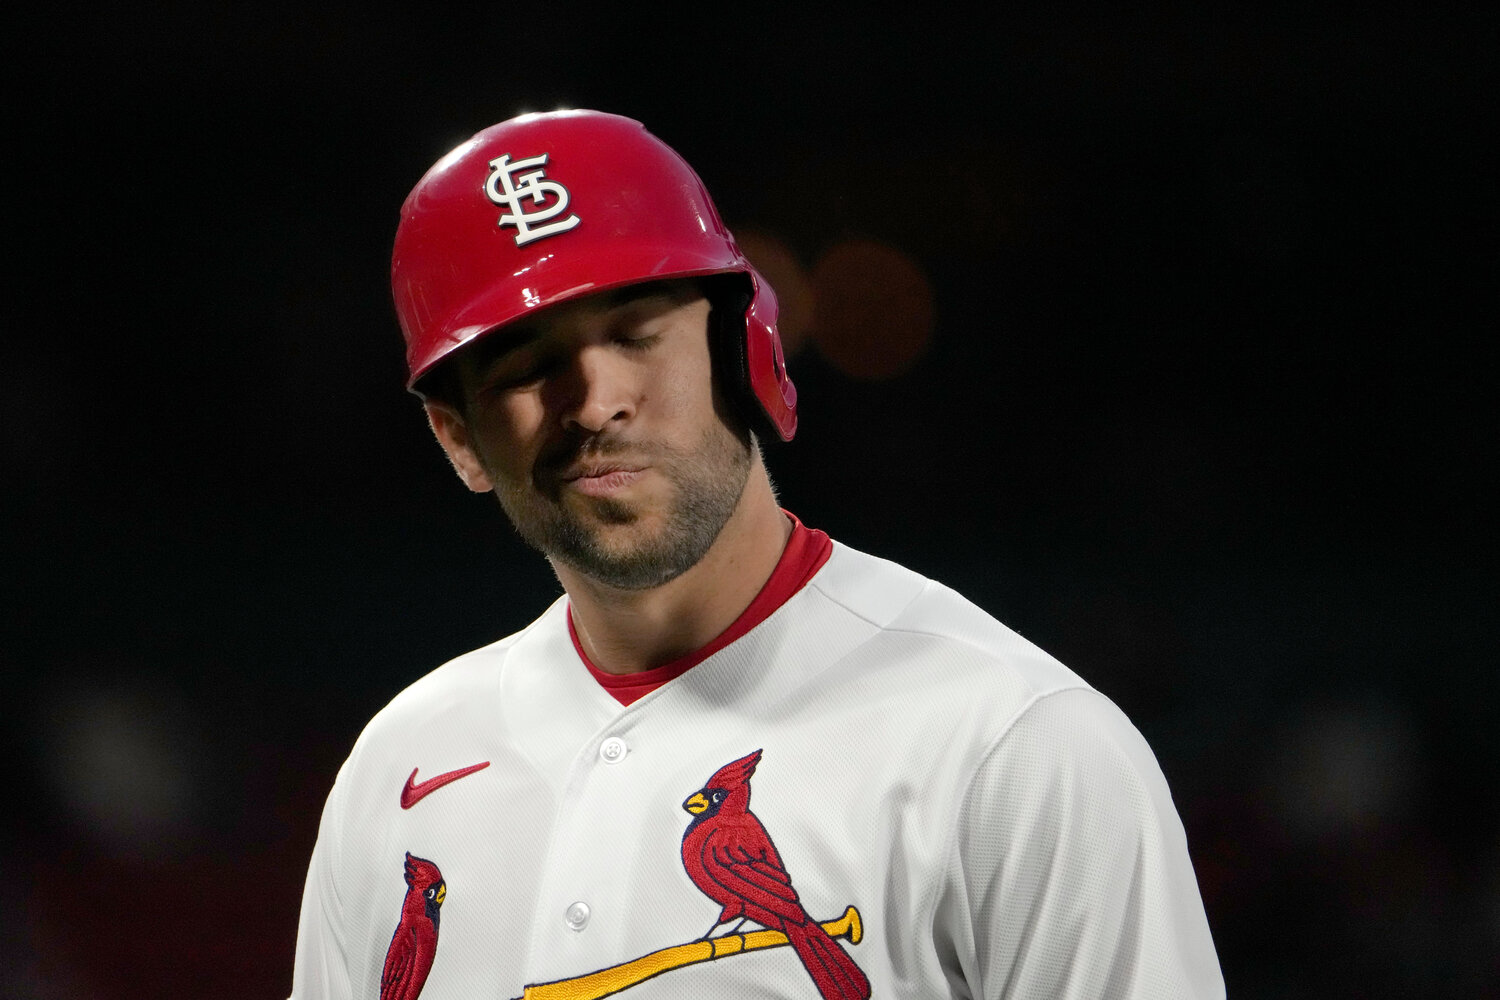 St. Louis Cardinals' Dylan Carlson heads back to the dugout after flying out during the fifth inning of a baseball game against the Los Angeles Angels Tuesday, May 2, 2023, in St. Louis. (AP Photo/Jeff Roberson)